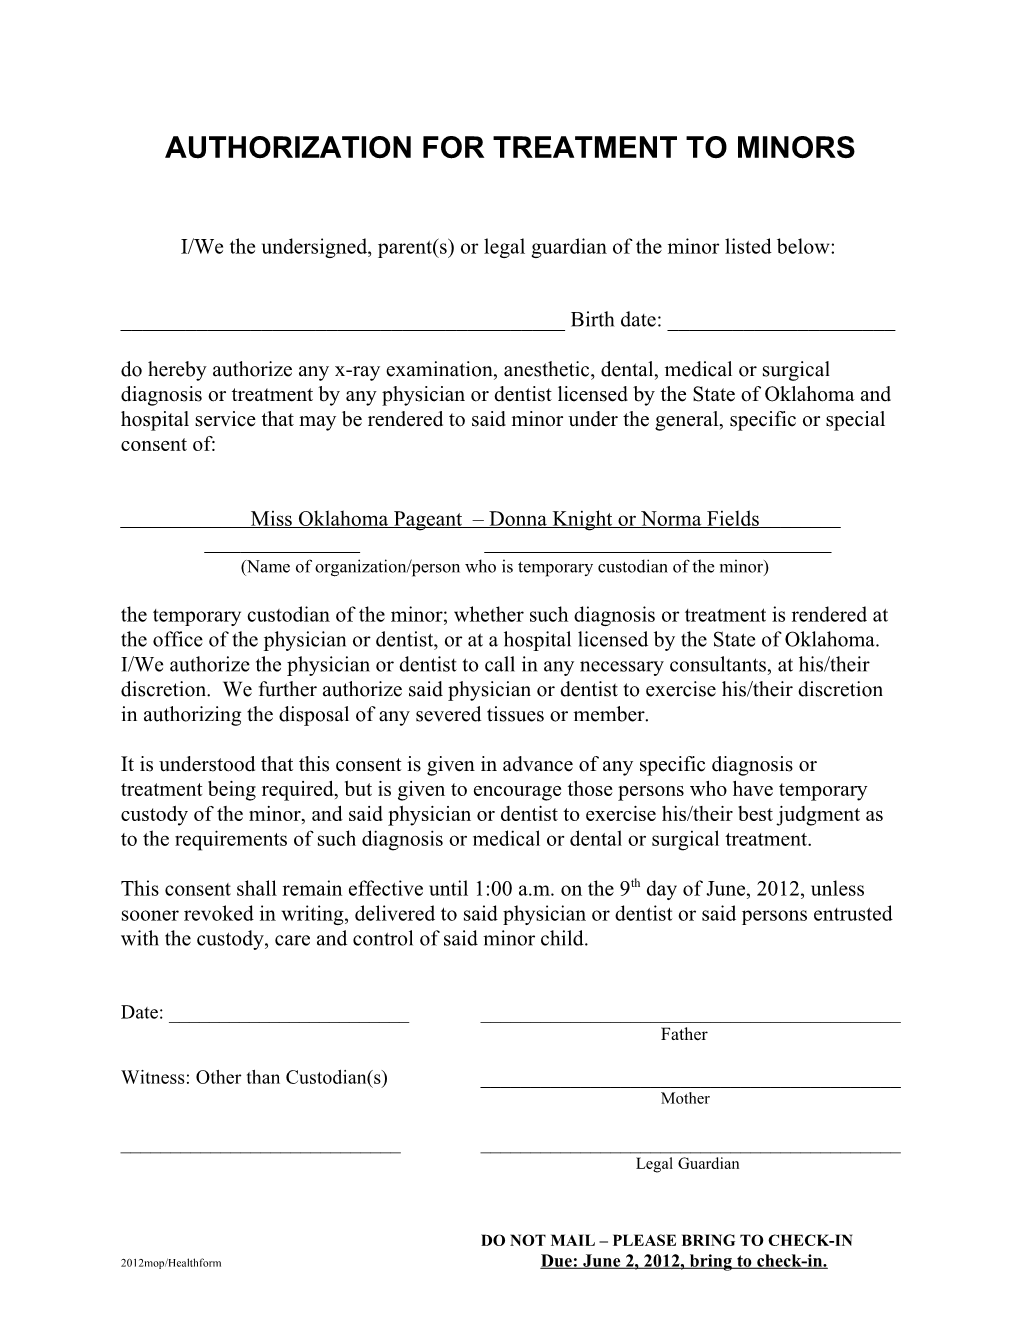 Authorization for Treatment to Minors